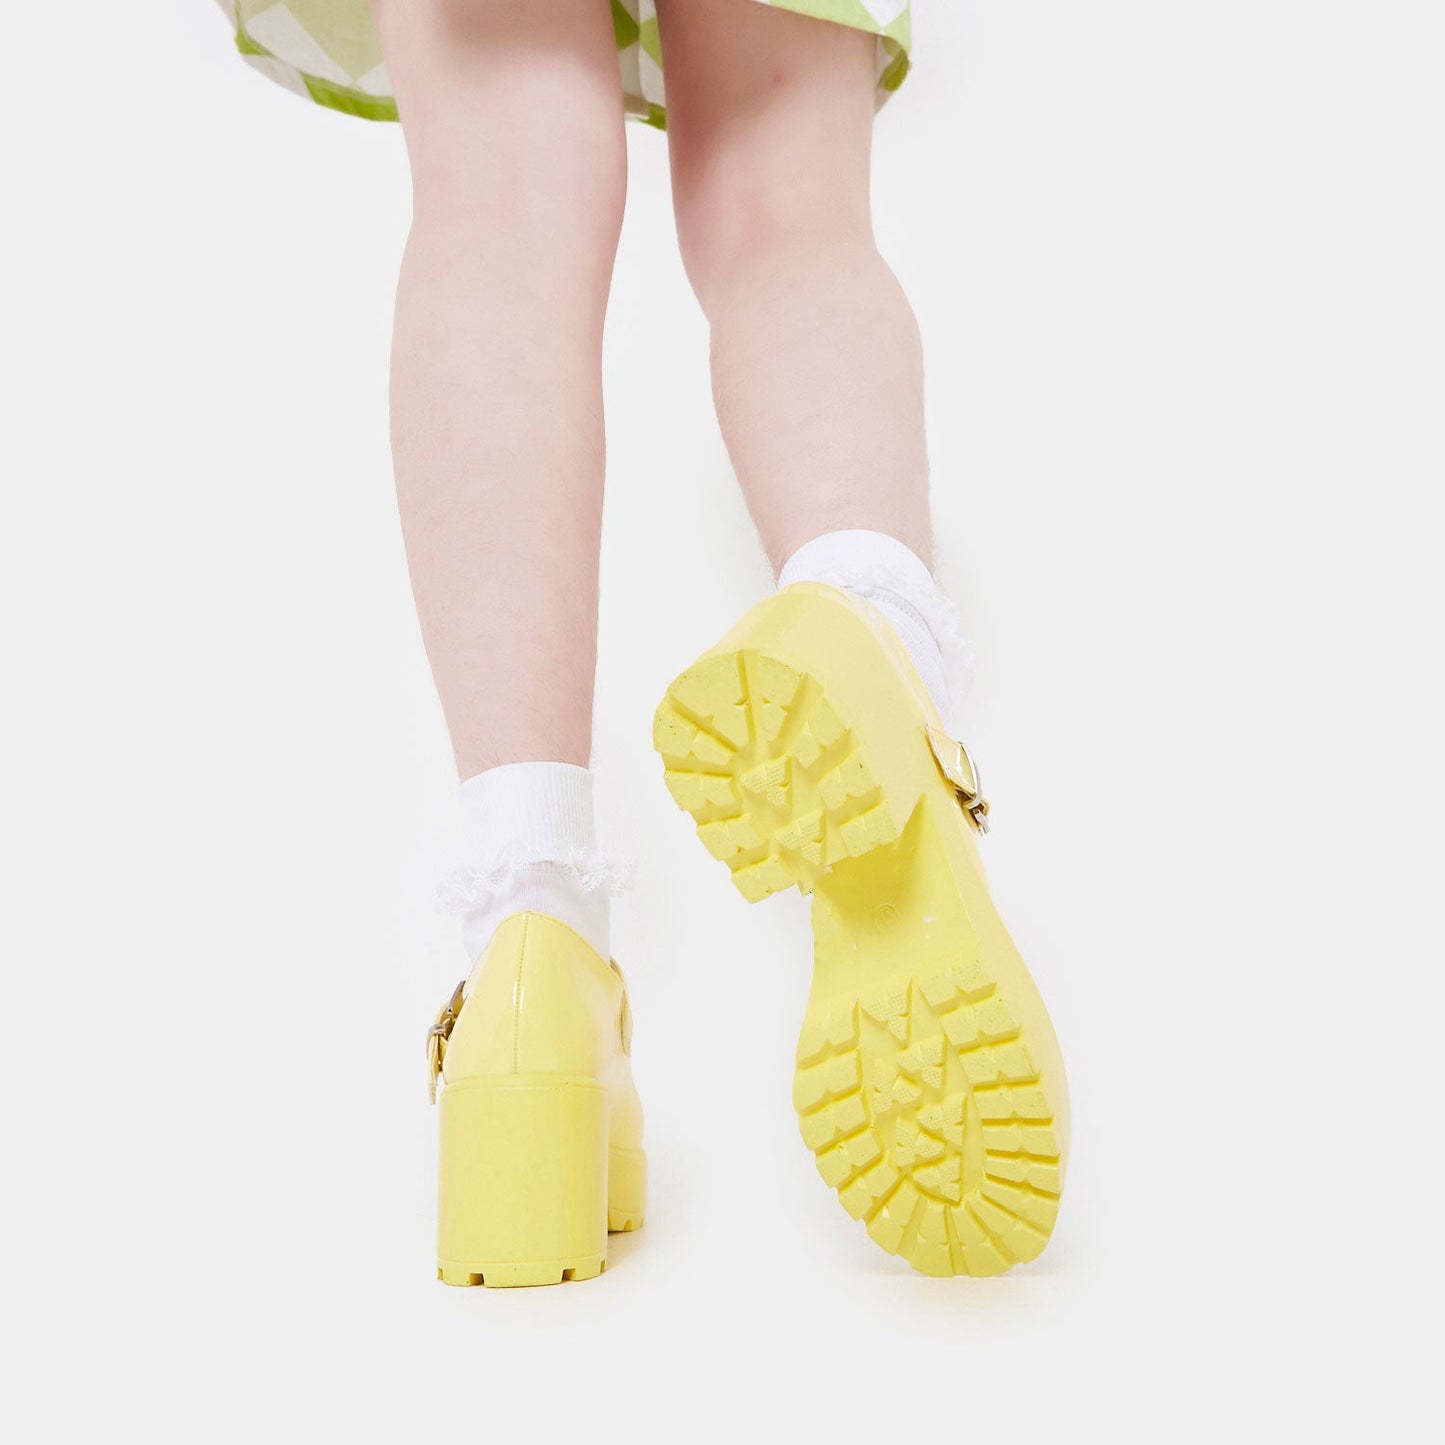 Tira Mary Jane Shoes 'Sunshine Yellow Edition' - Mary Janes - KOI Footwear - Yellow - Model Sole View